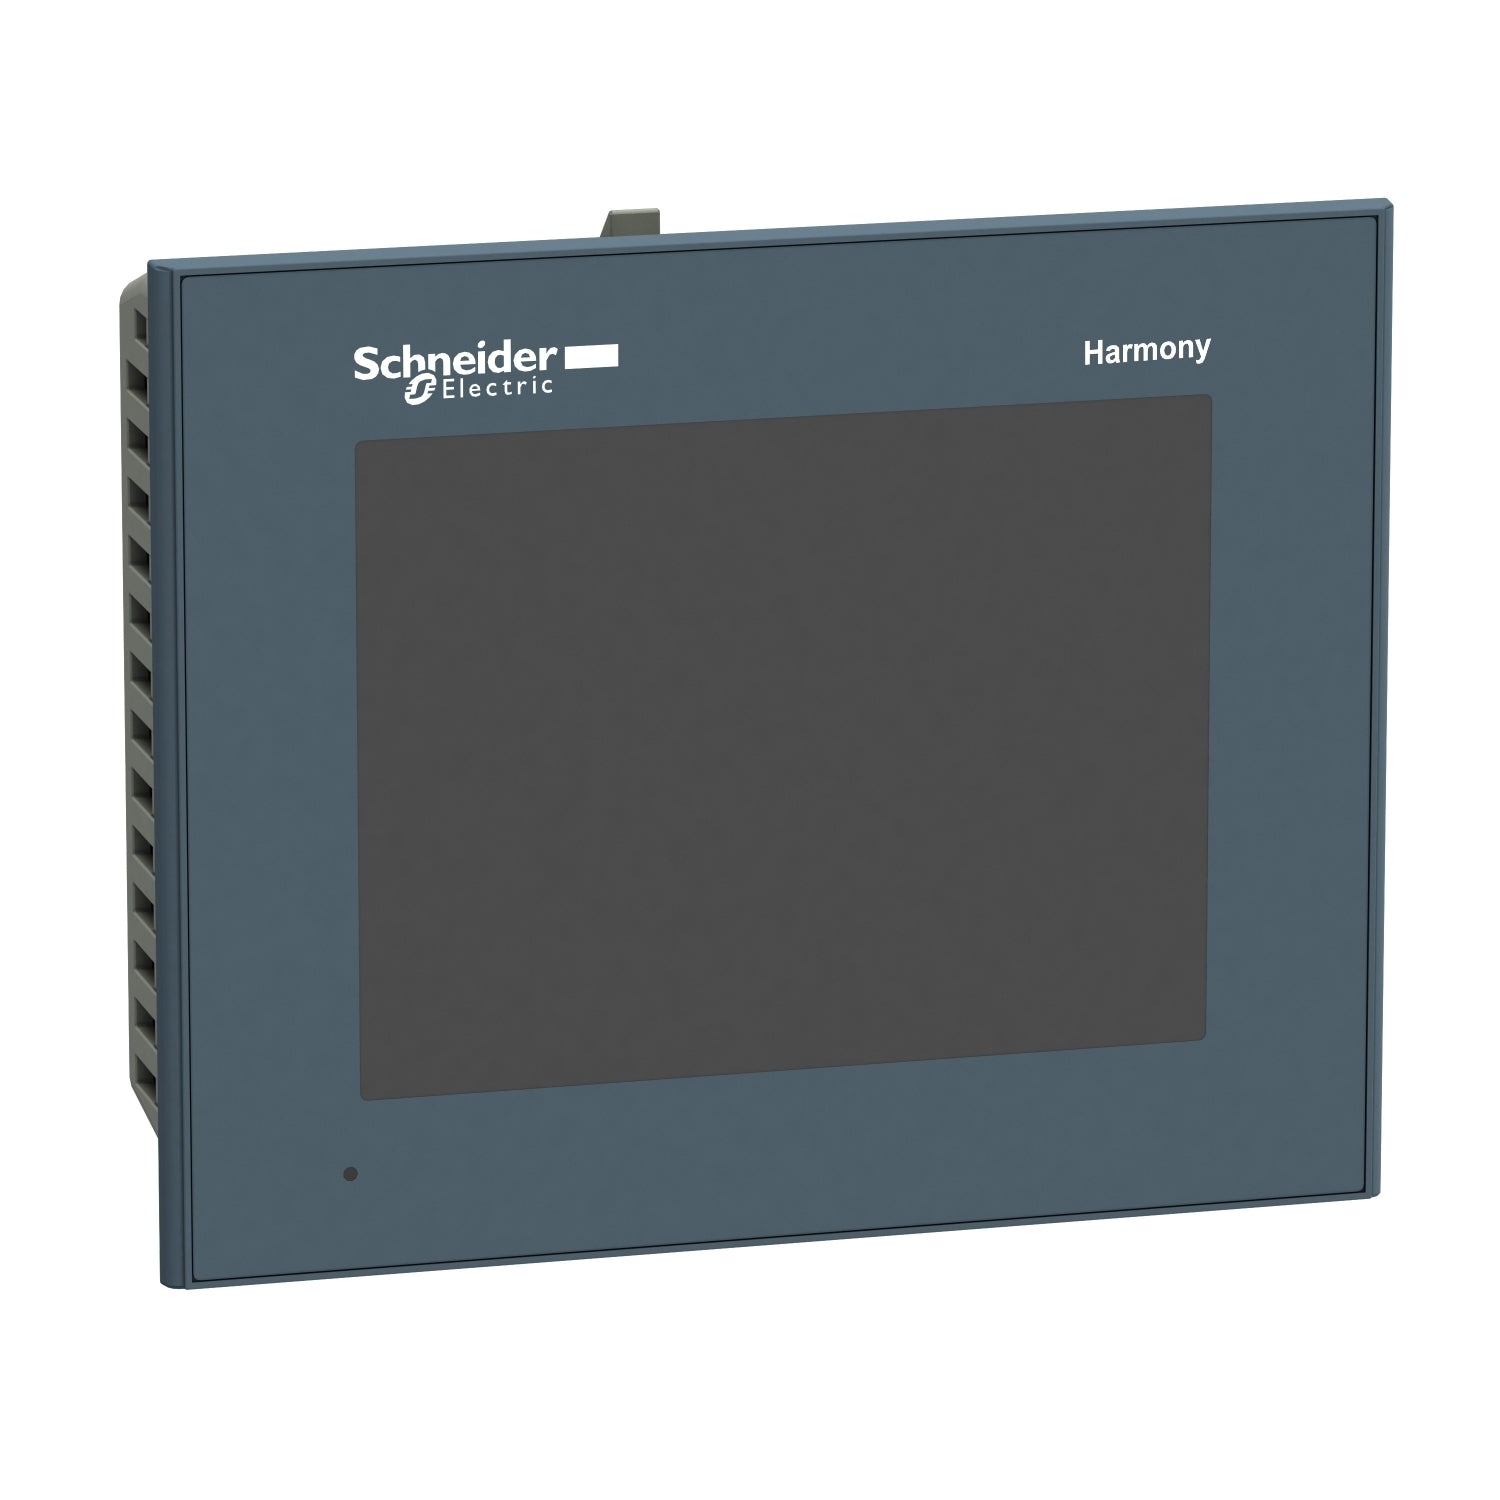 HMIGTO2310 | Schneider Electric Advanced touchscreen panel